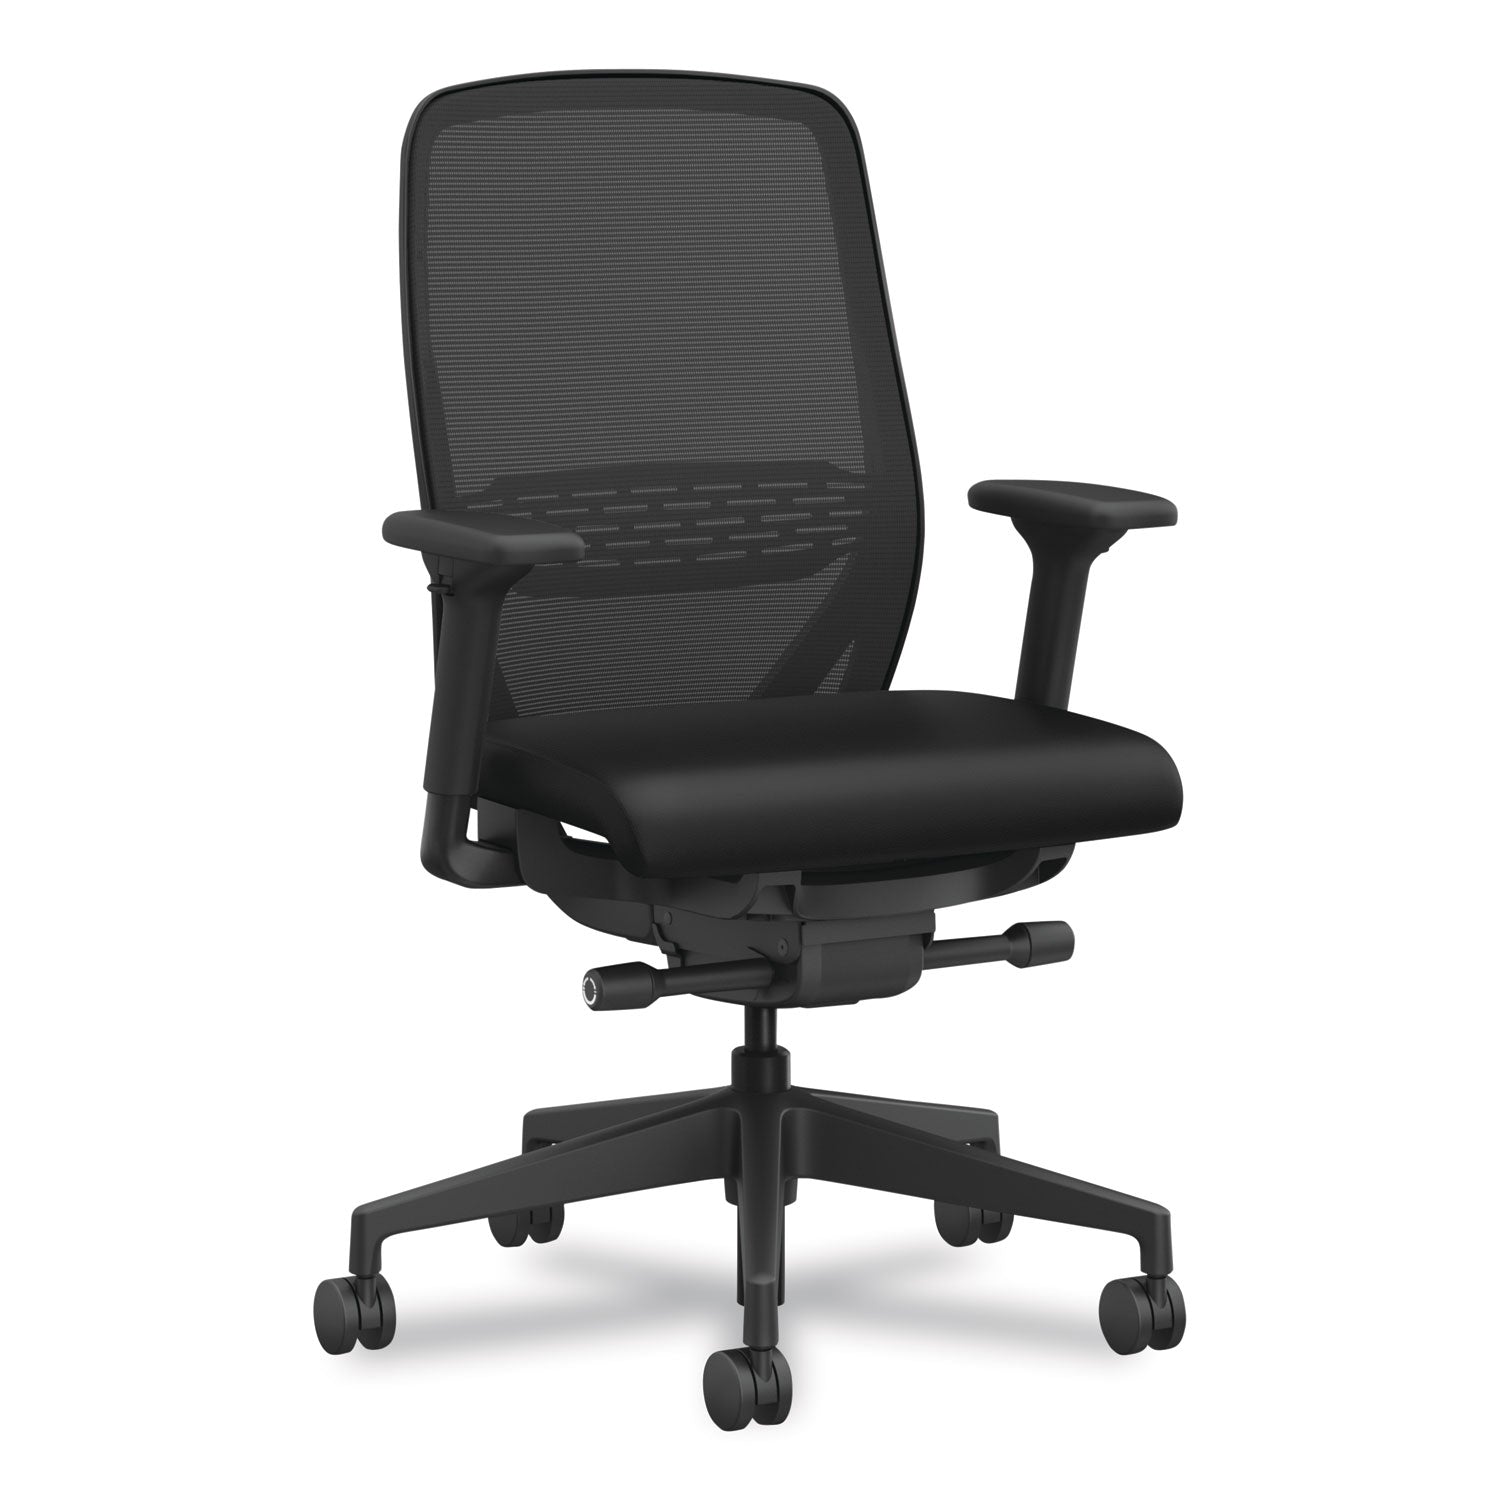 nucleus-series-recharge-task-chair-supports-up-to-300-lb-1663-to-2113-seat-height-black-ships-in-7-10-business-days_honnr12samu10bt - 1